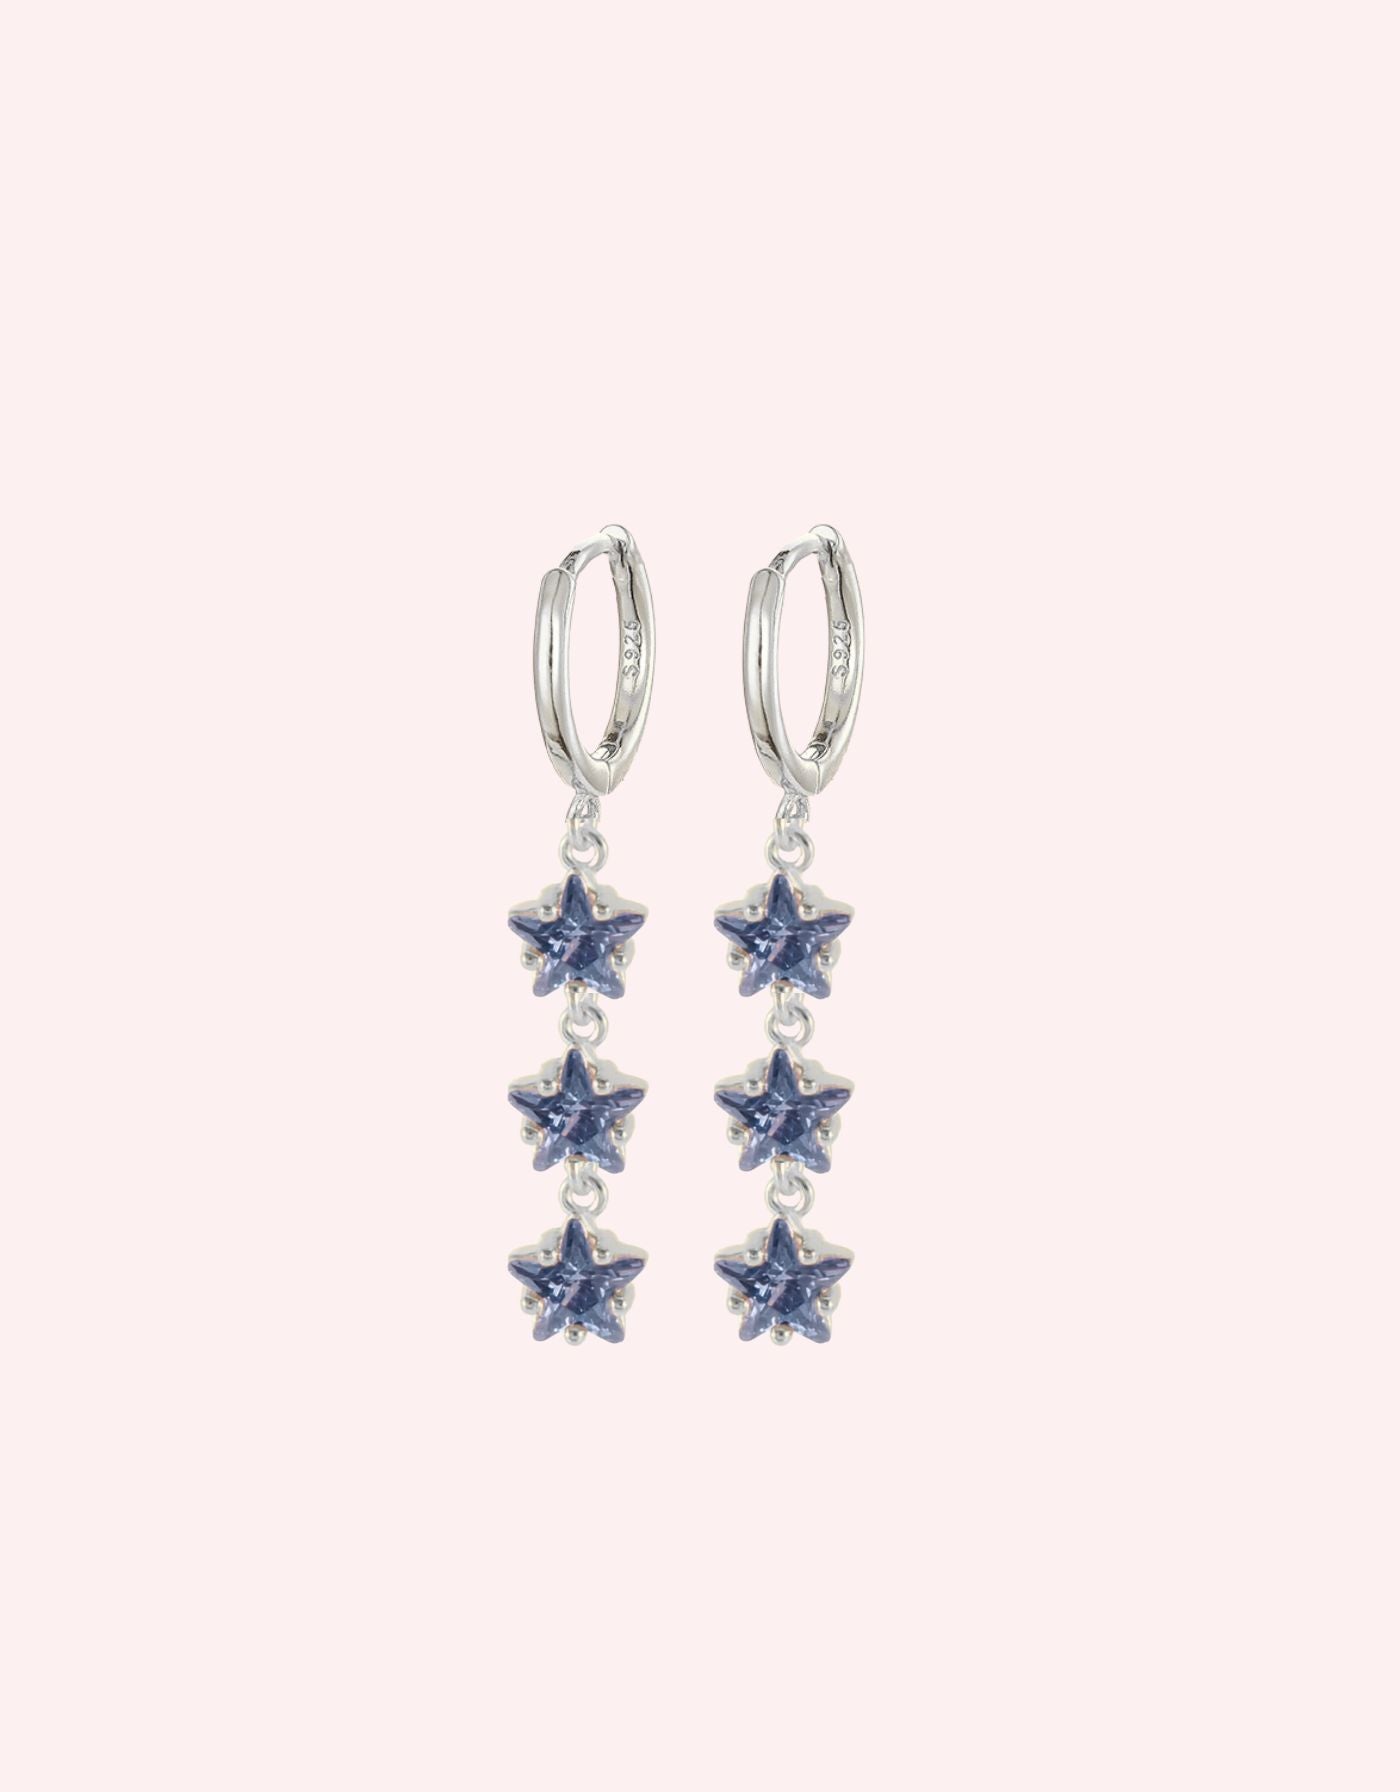 Jelly star huggies blue/silver - Smoothie London - Sterling Silver